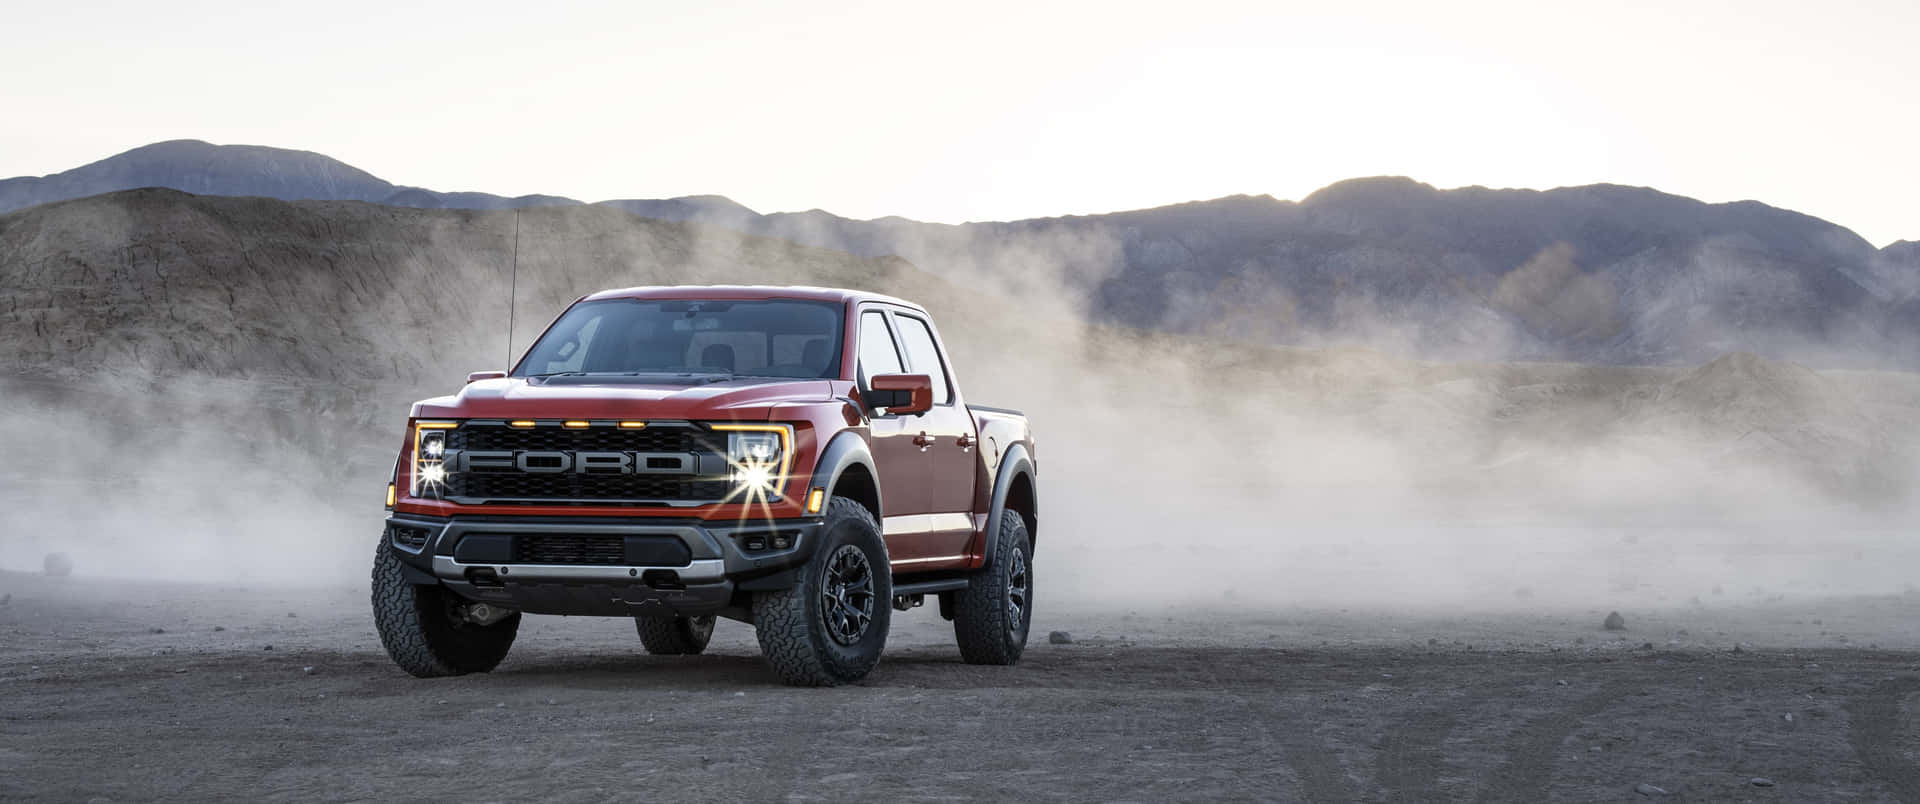 The 2020 Ford F-150 Raptor Is Driving Through The Desert Wallpaper